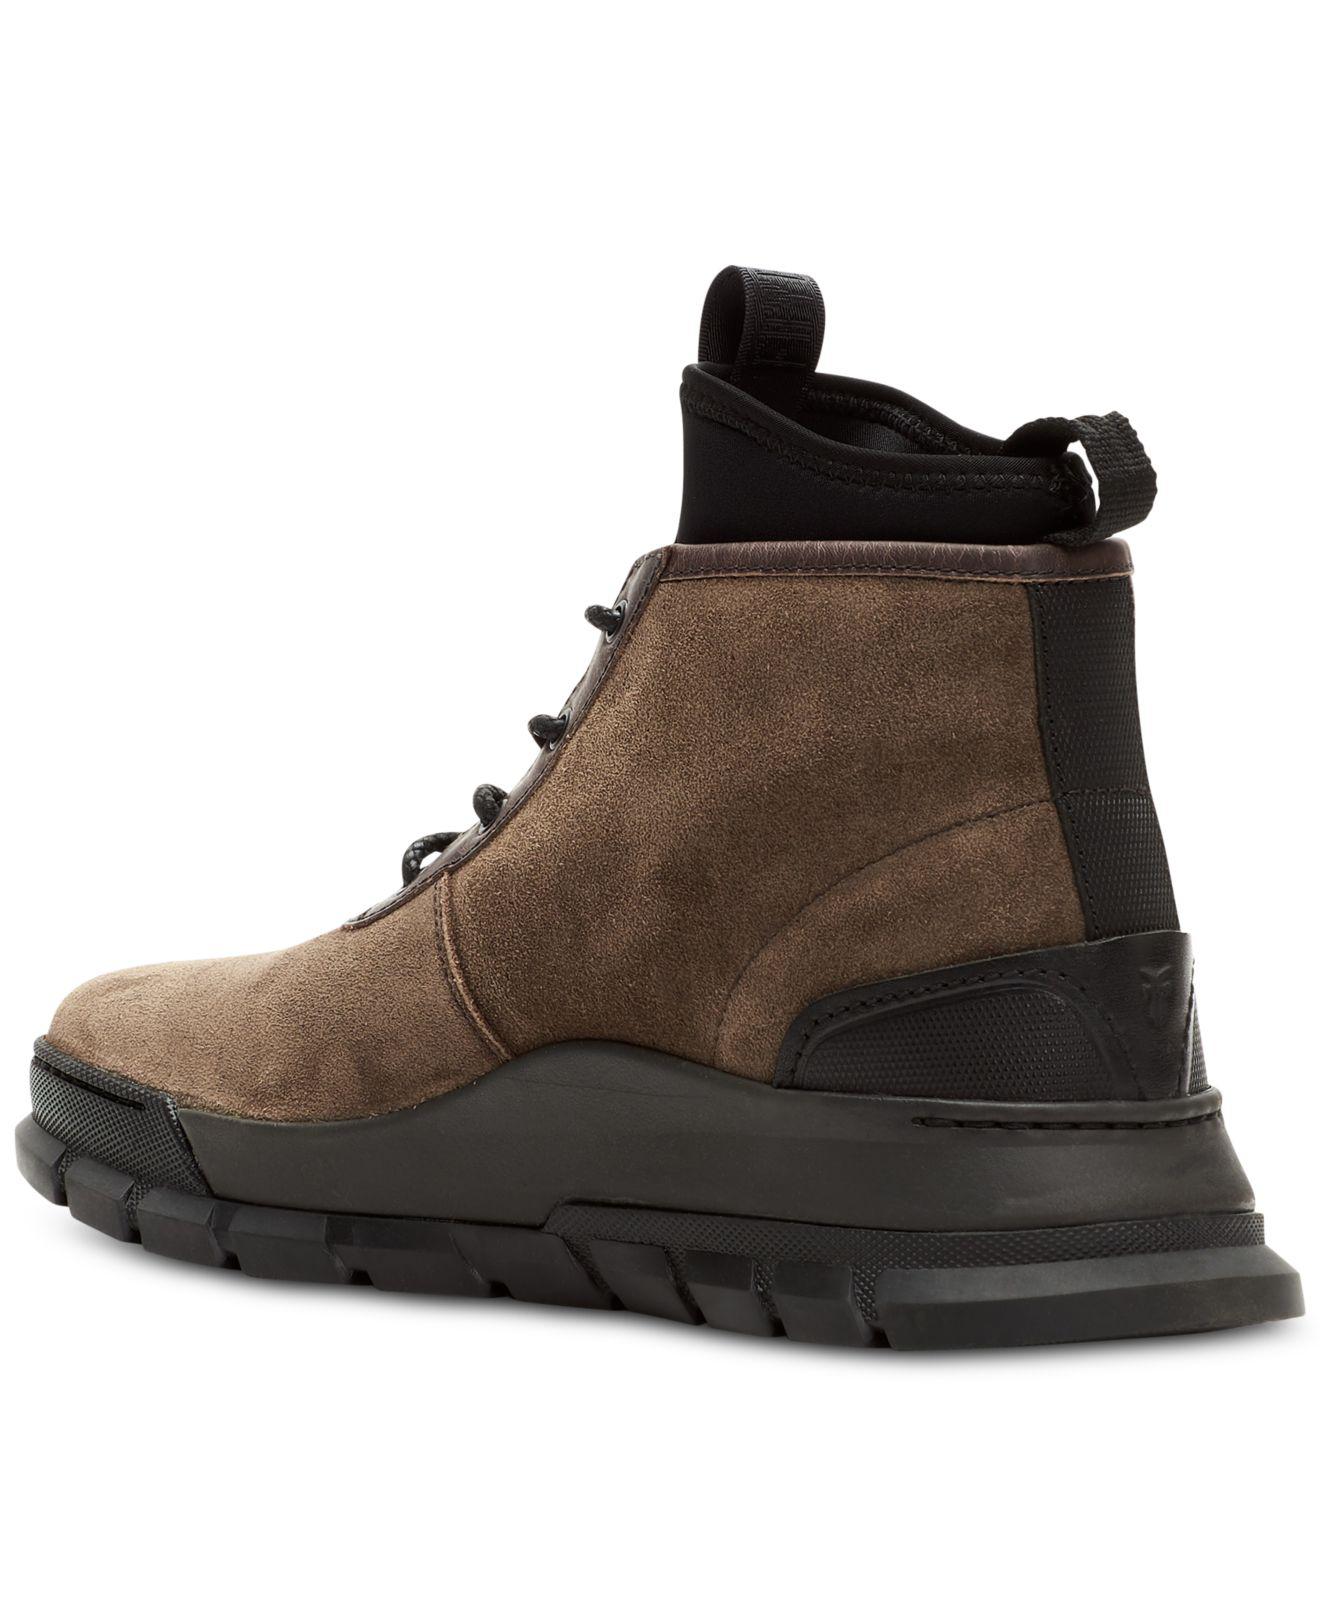 Frye Explorer Leather Boot in Gray 